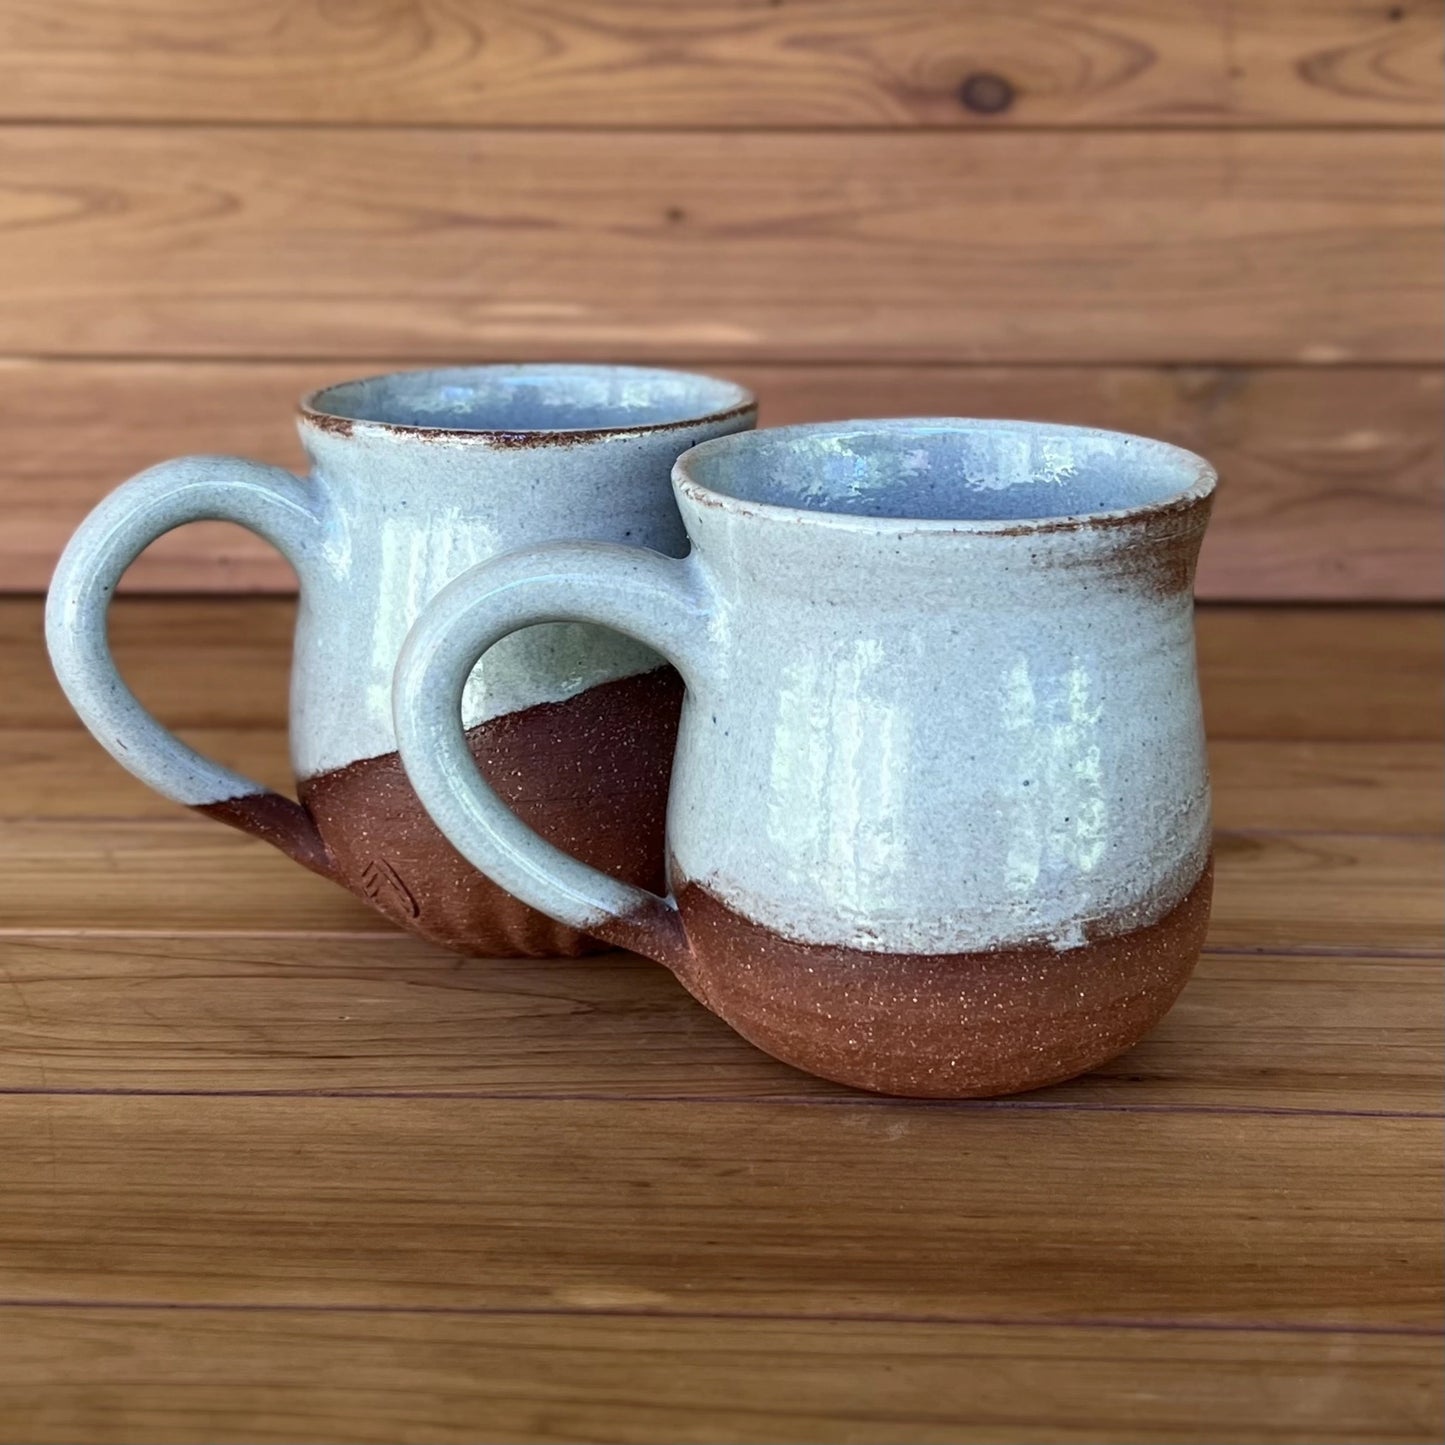 Pair of red stoneware pottery mugs glazed in blue